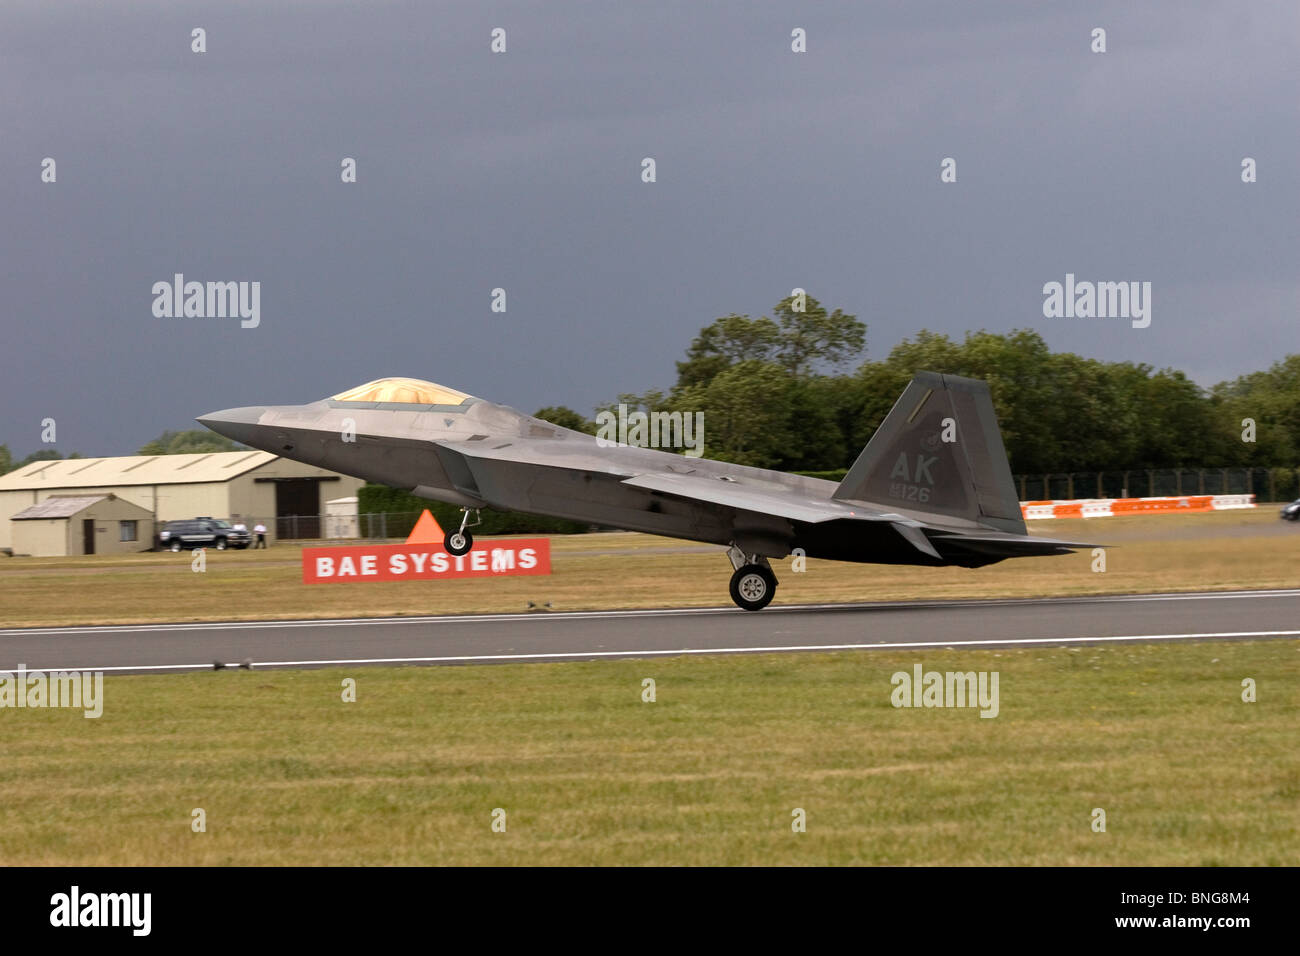 United States Air Force Lockheed F22 Raptor fighter aircraft at Royal International Air Tattoo RIAT 2010 Air Show Fairford Stock Photo